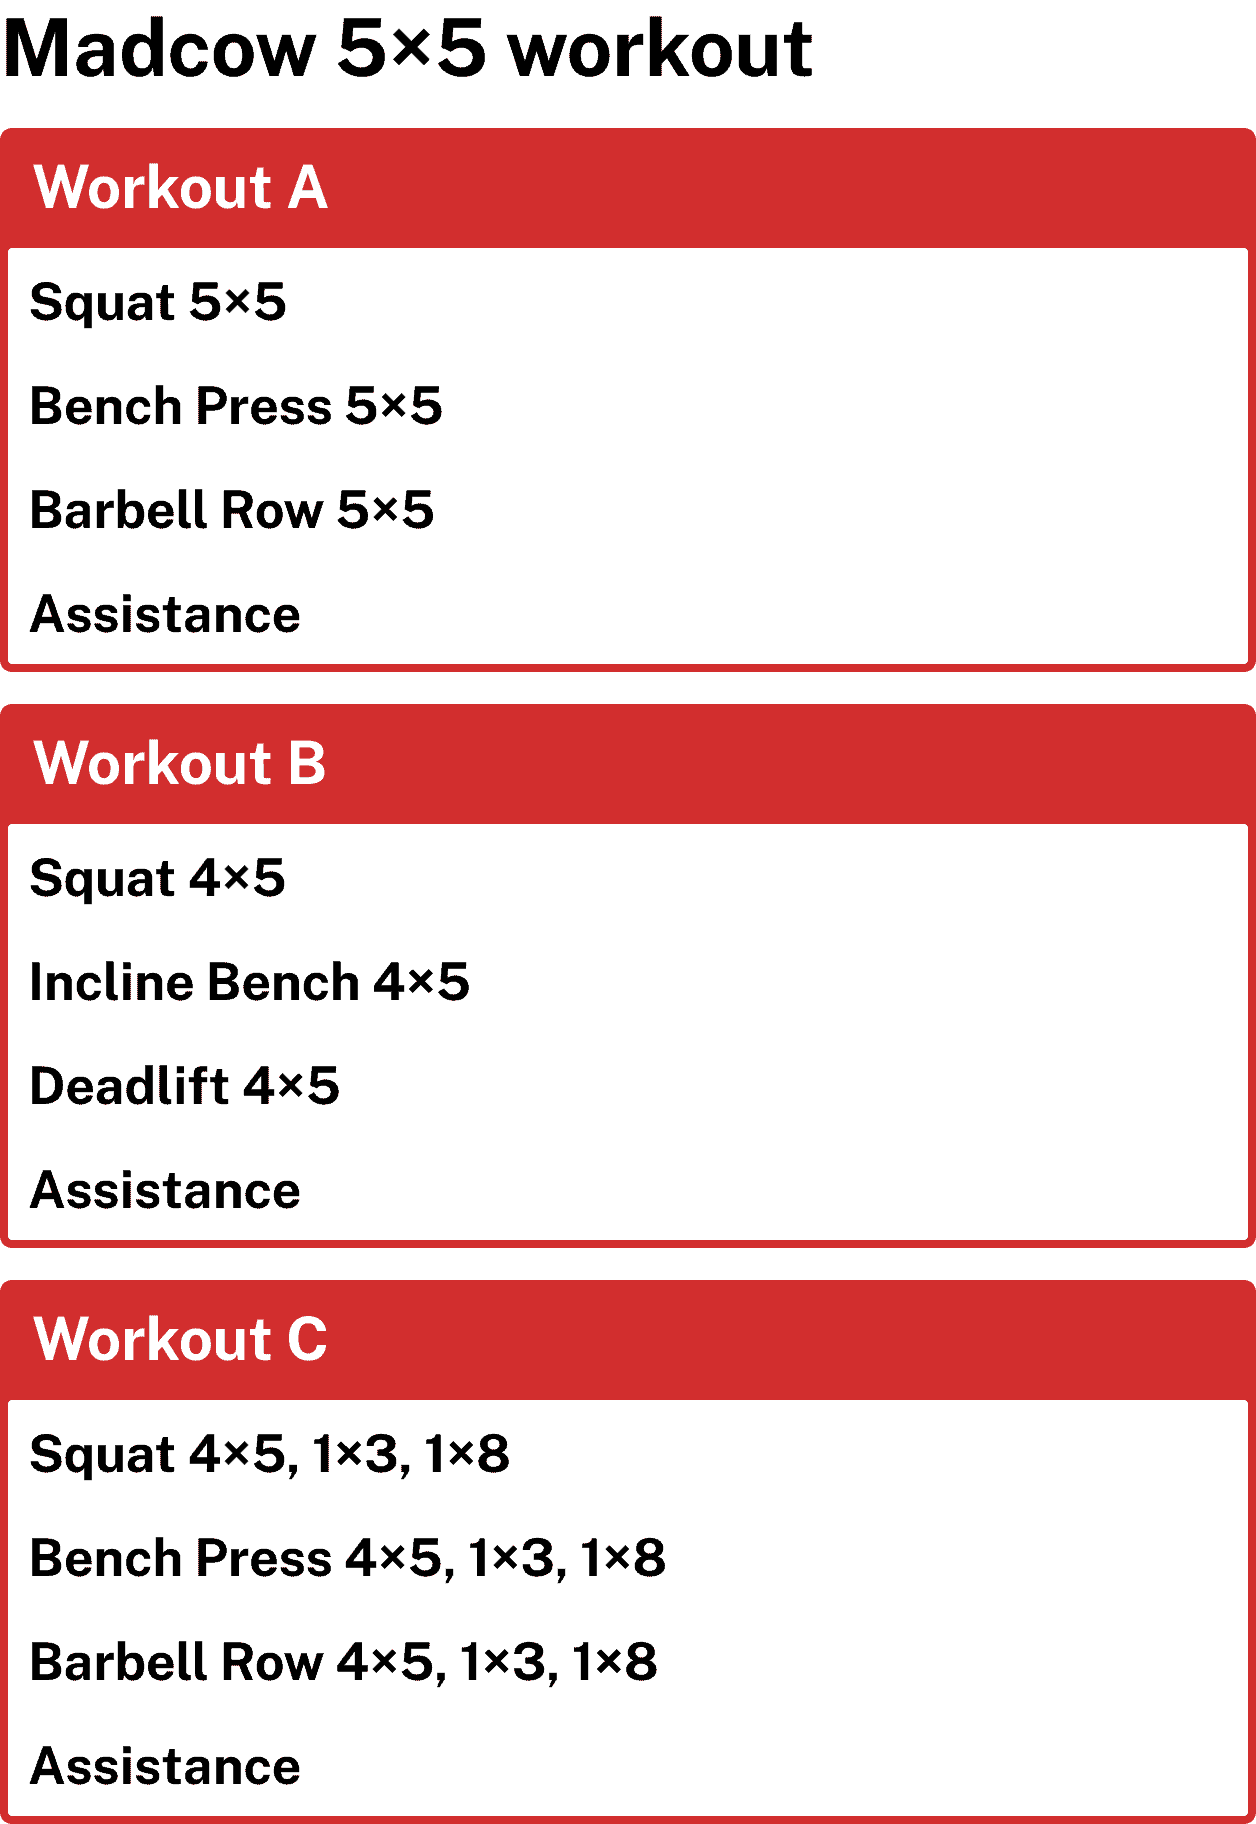 Madcow 5x5 workout schedule